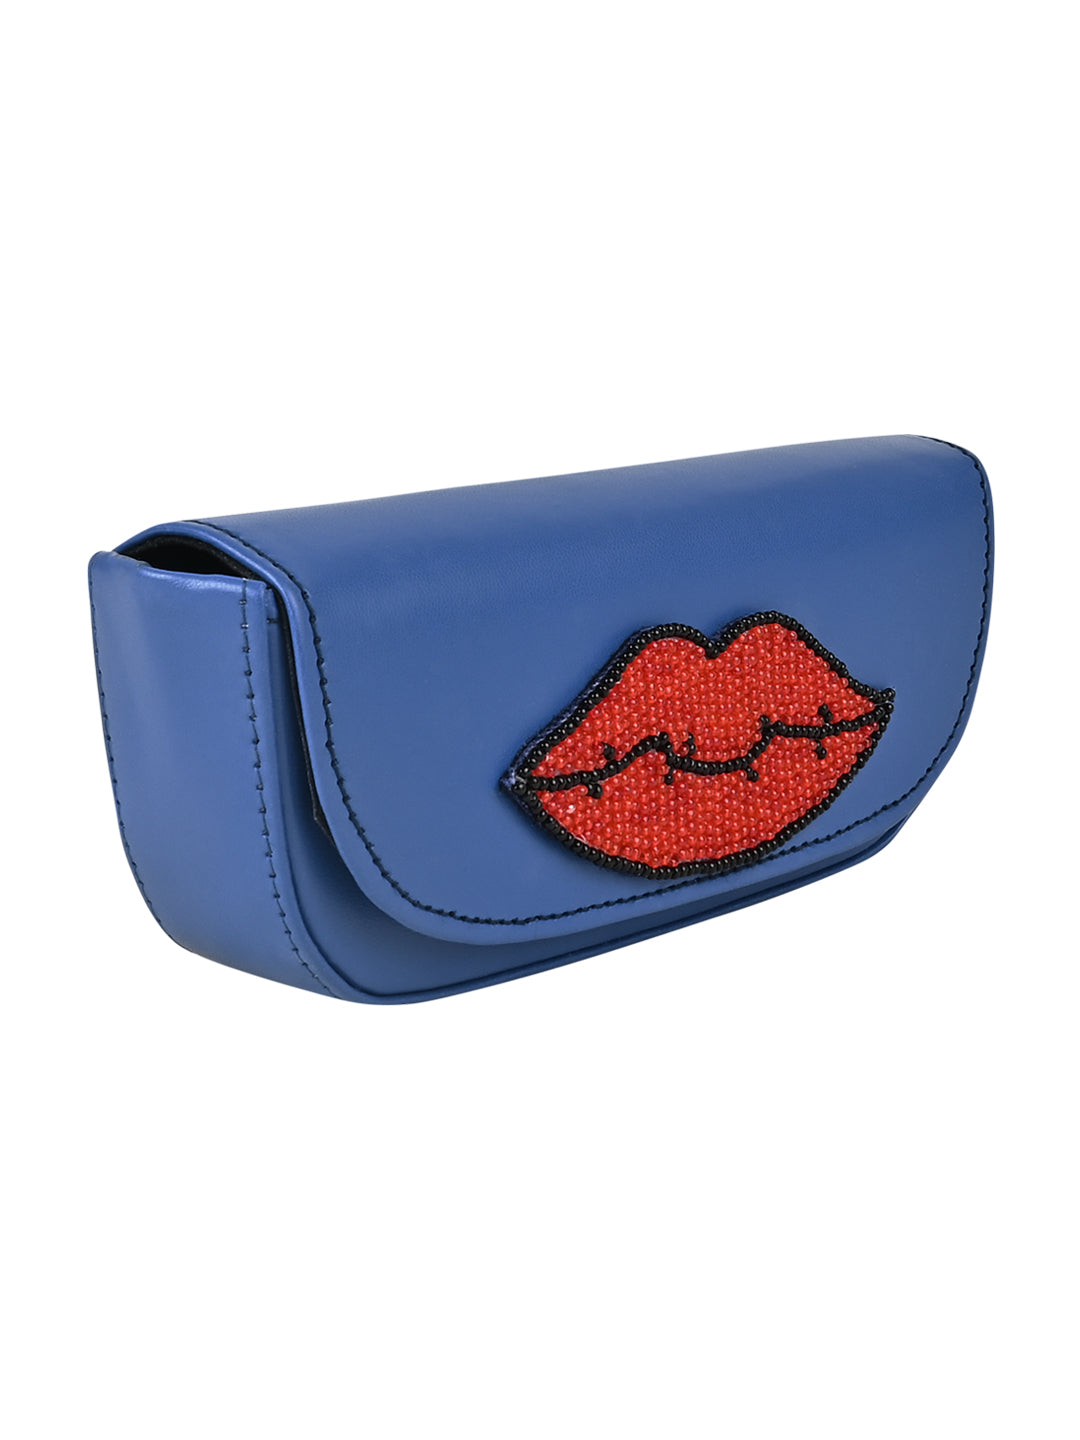 Store your sunglasses with confidence in our stylish sunglass case. 